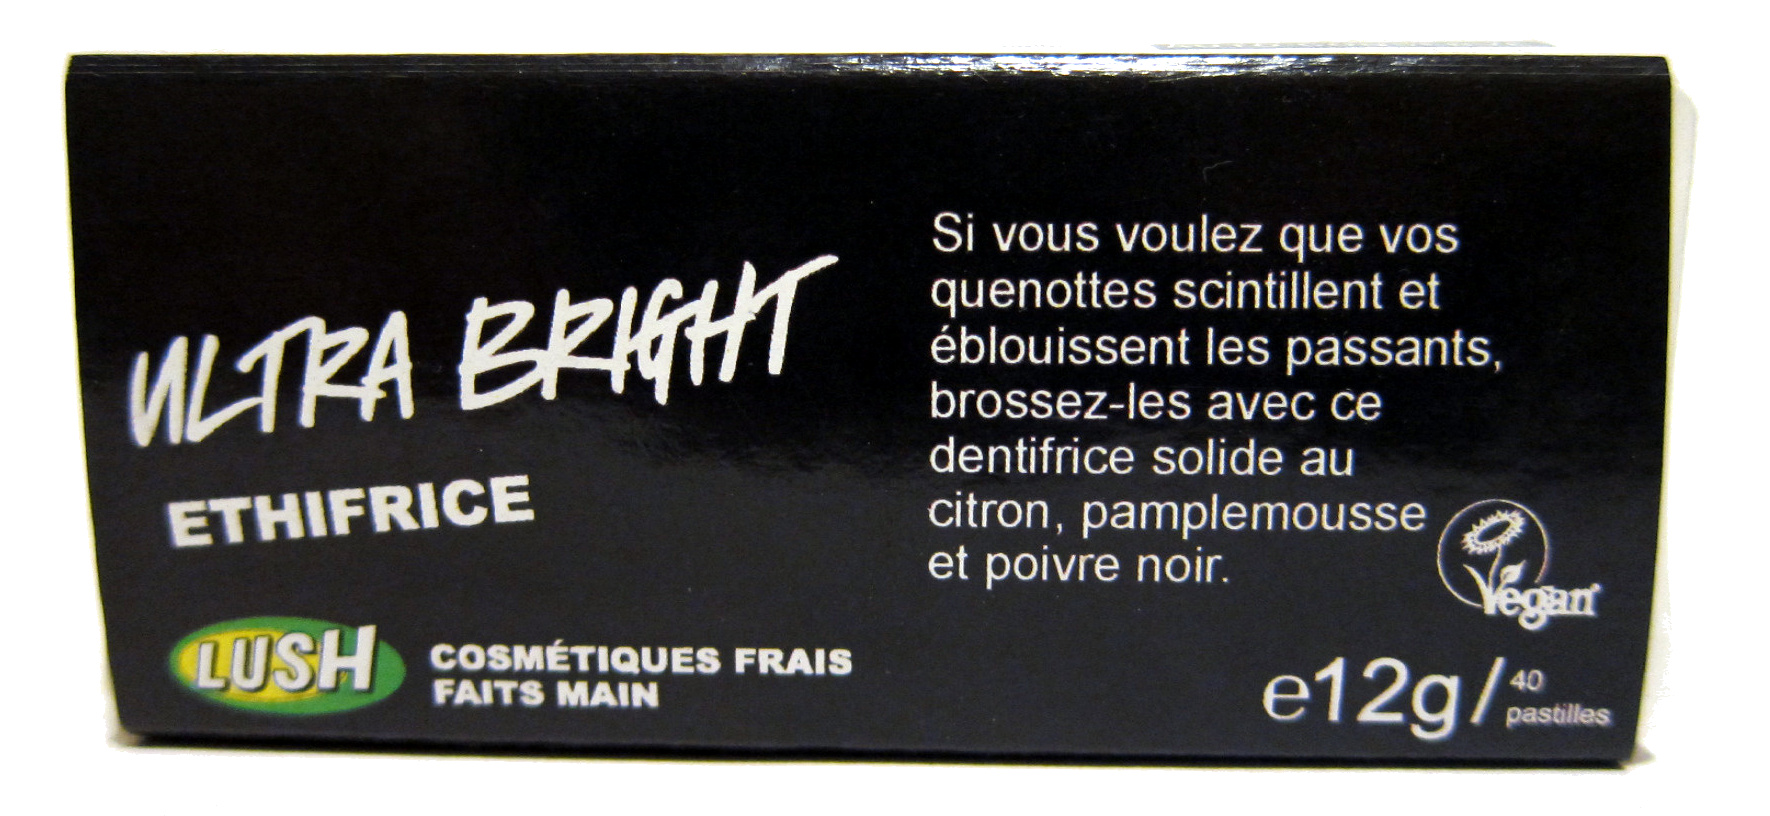 Ethifrice Ultra Bright - Tuote - fr